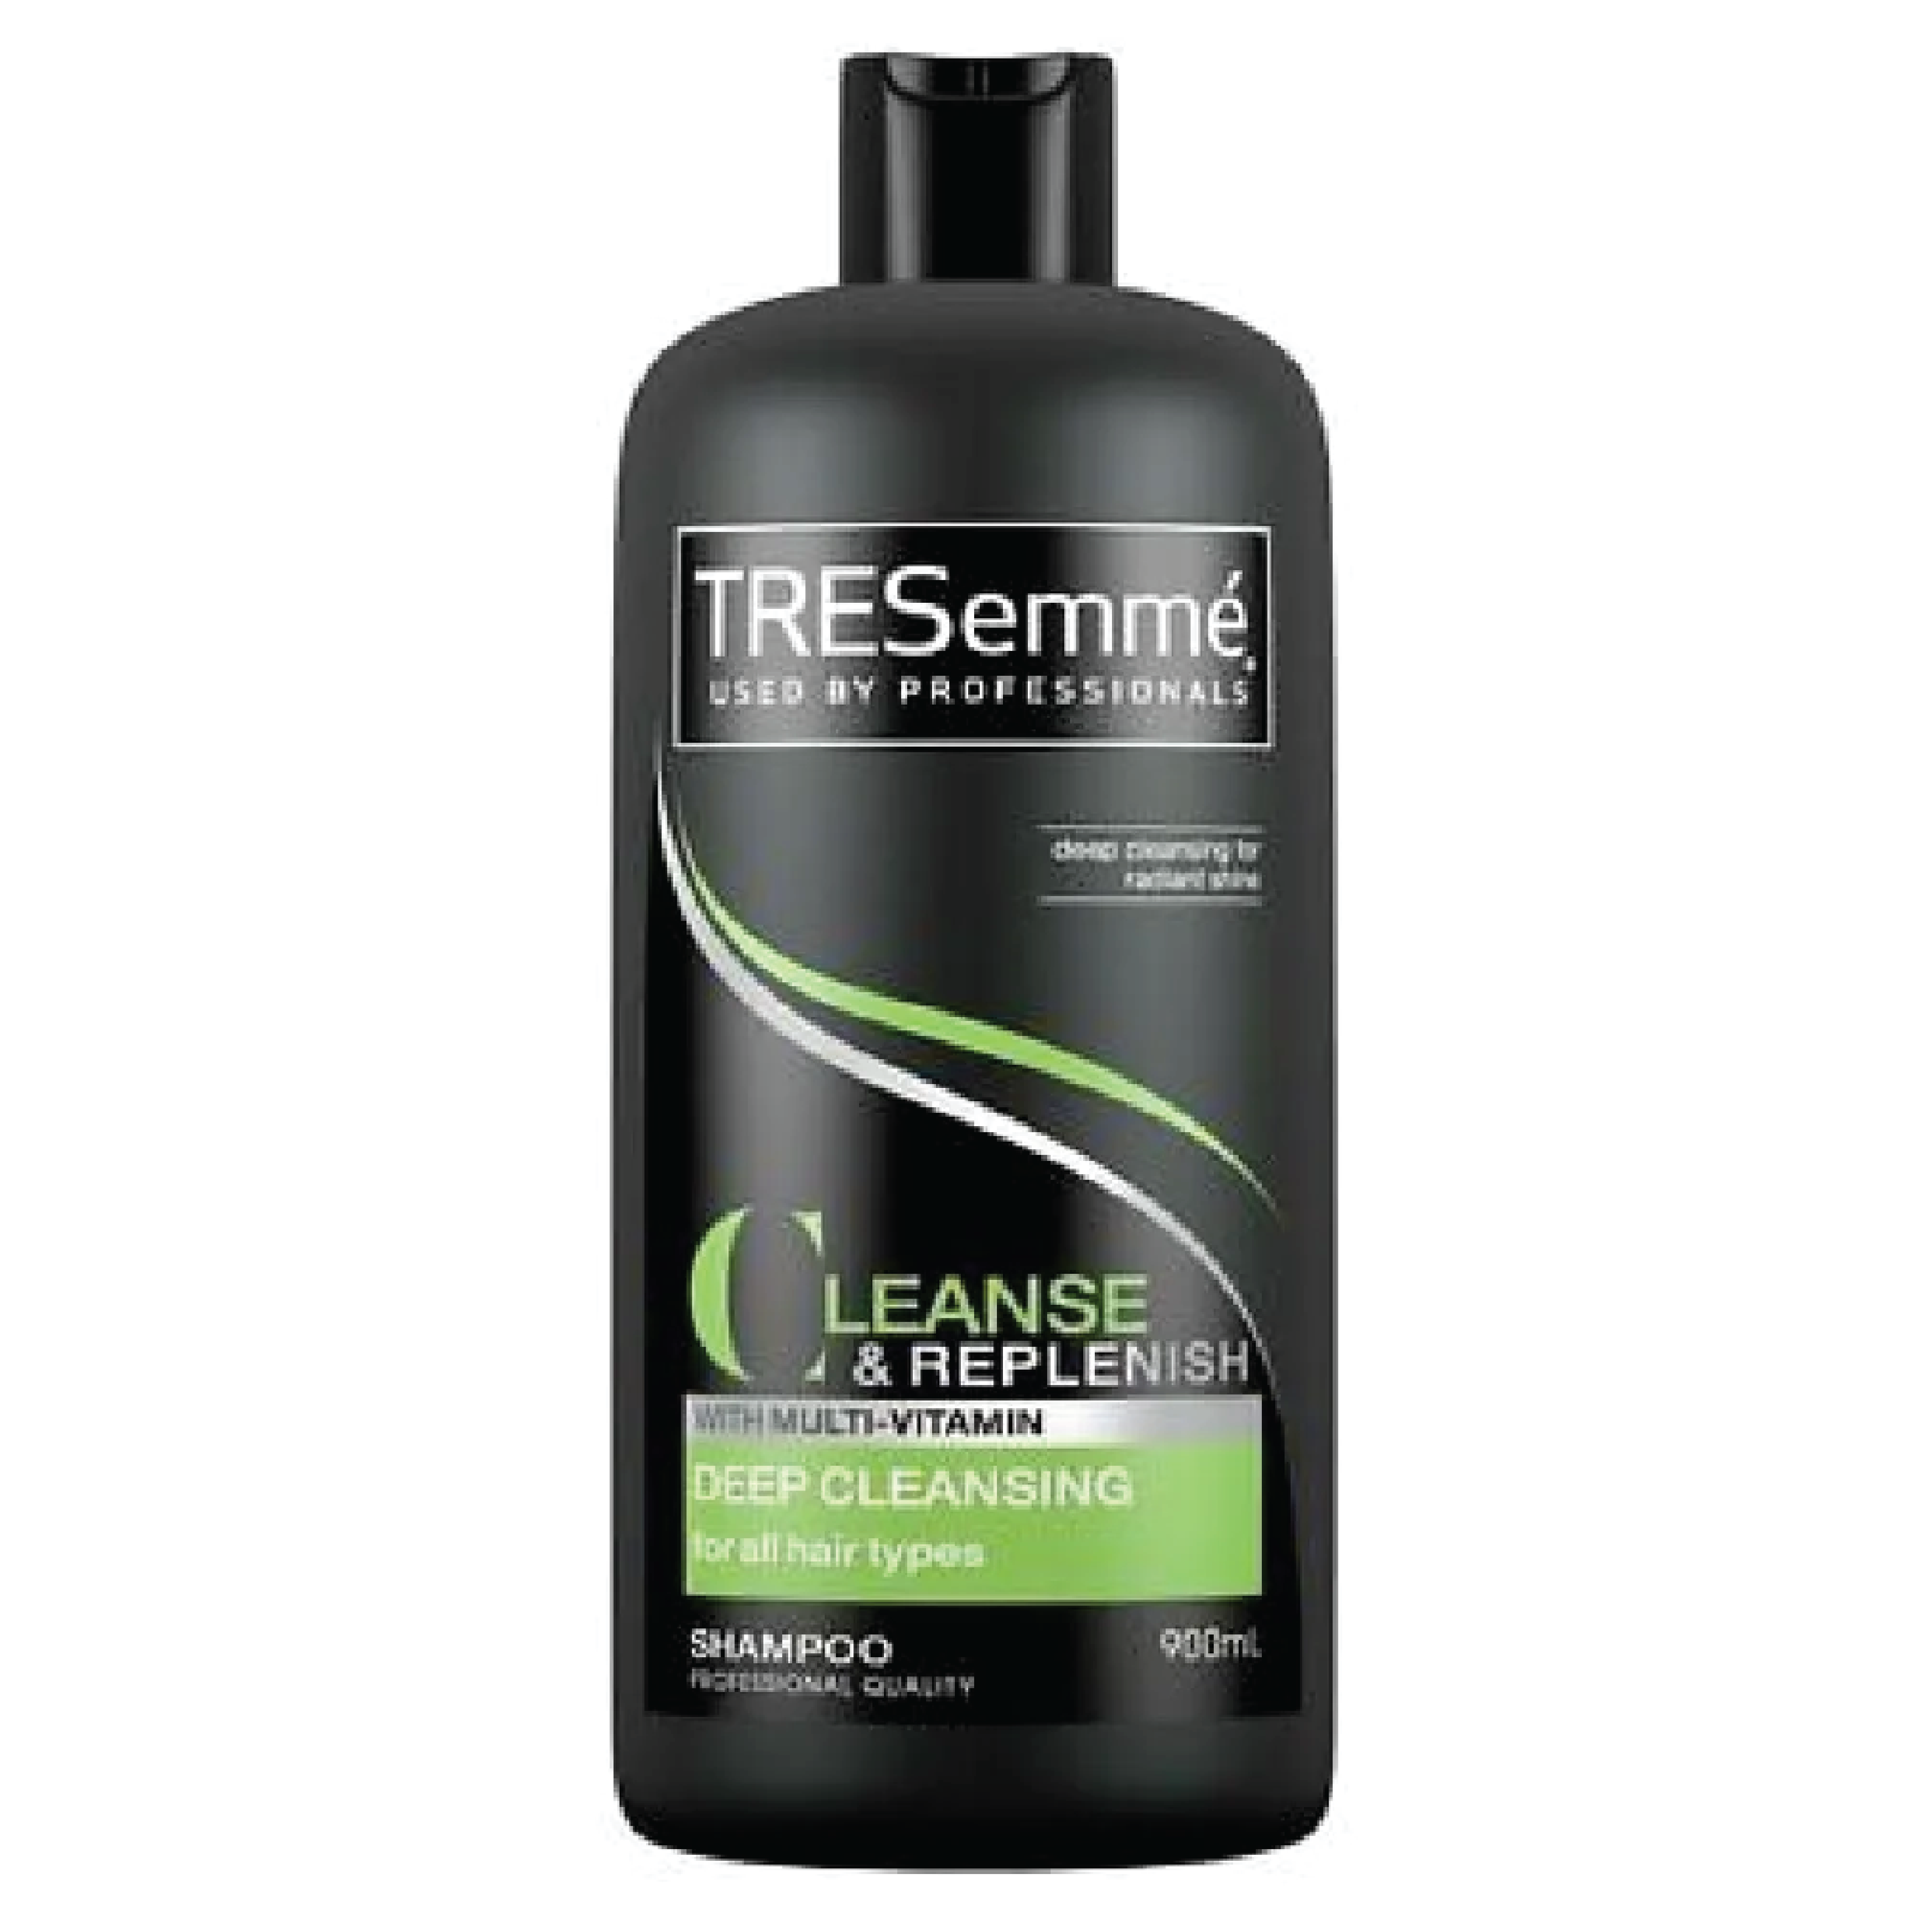 TreSemme' Cleanse & Replenish Deep Cleansing Shampoo 900ml